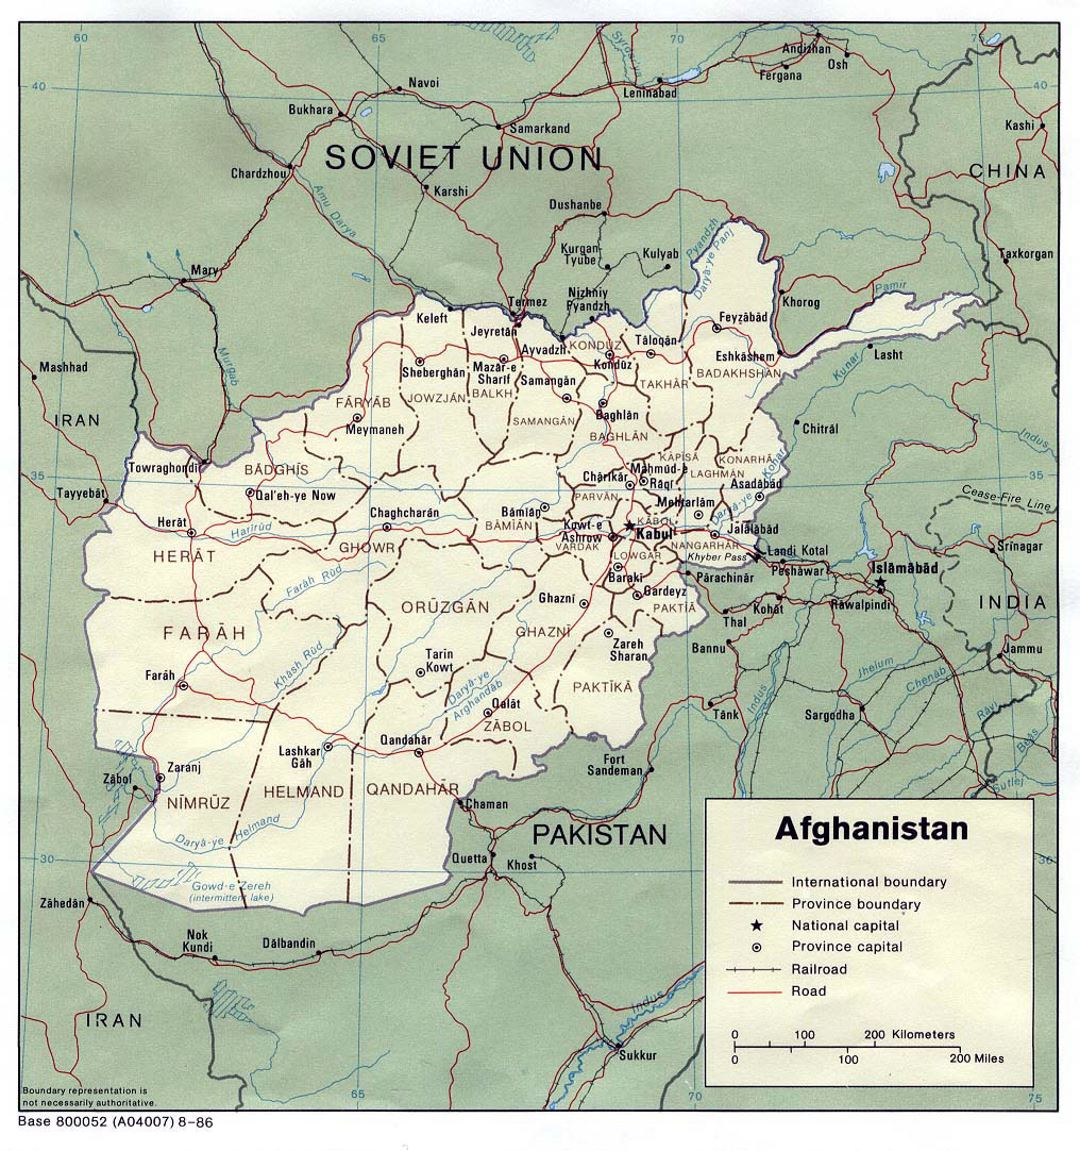 Detailed political and administrative map of Afghanistan - 1986